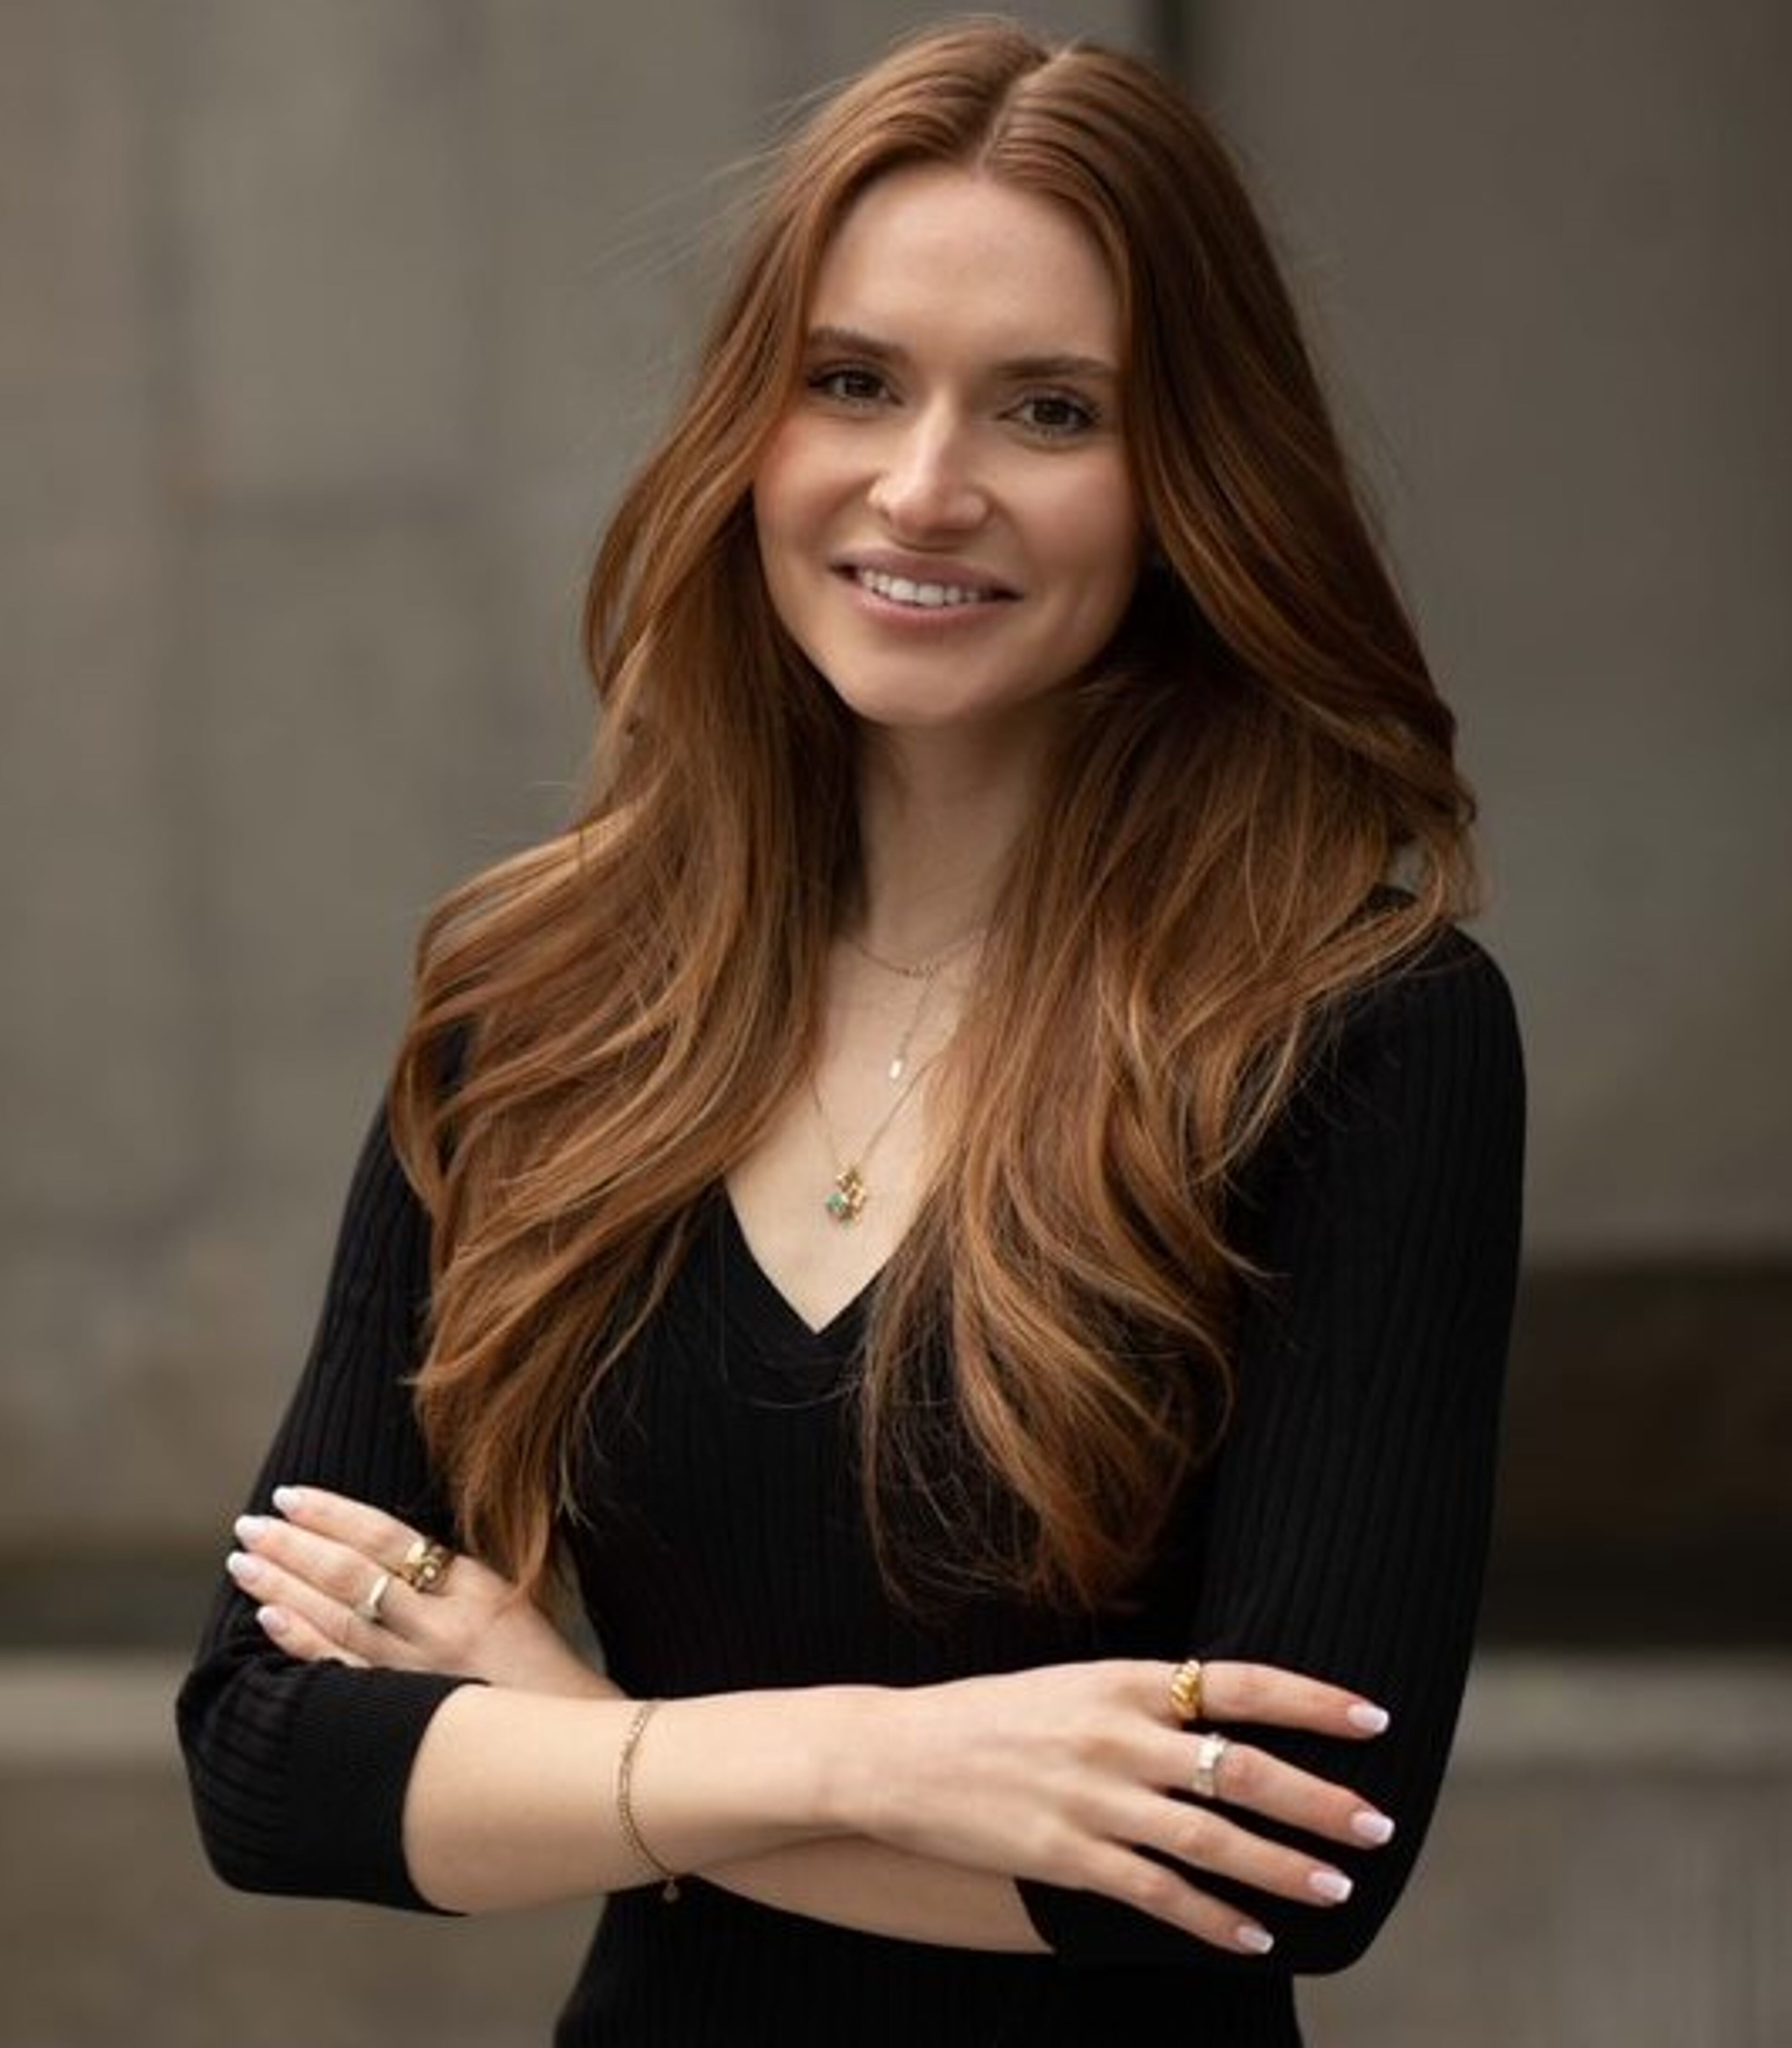 A woman with long auburn hair smiles gently, wearing a black V-neck top and gold jewelry.